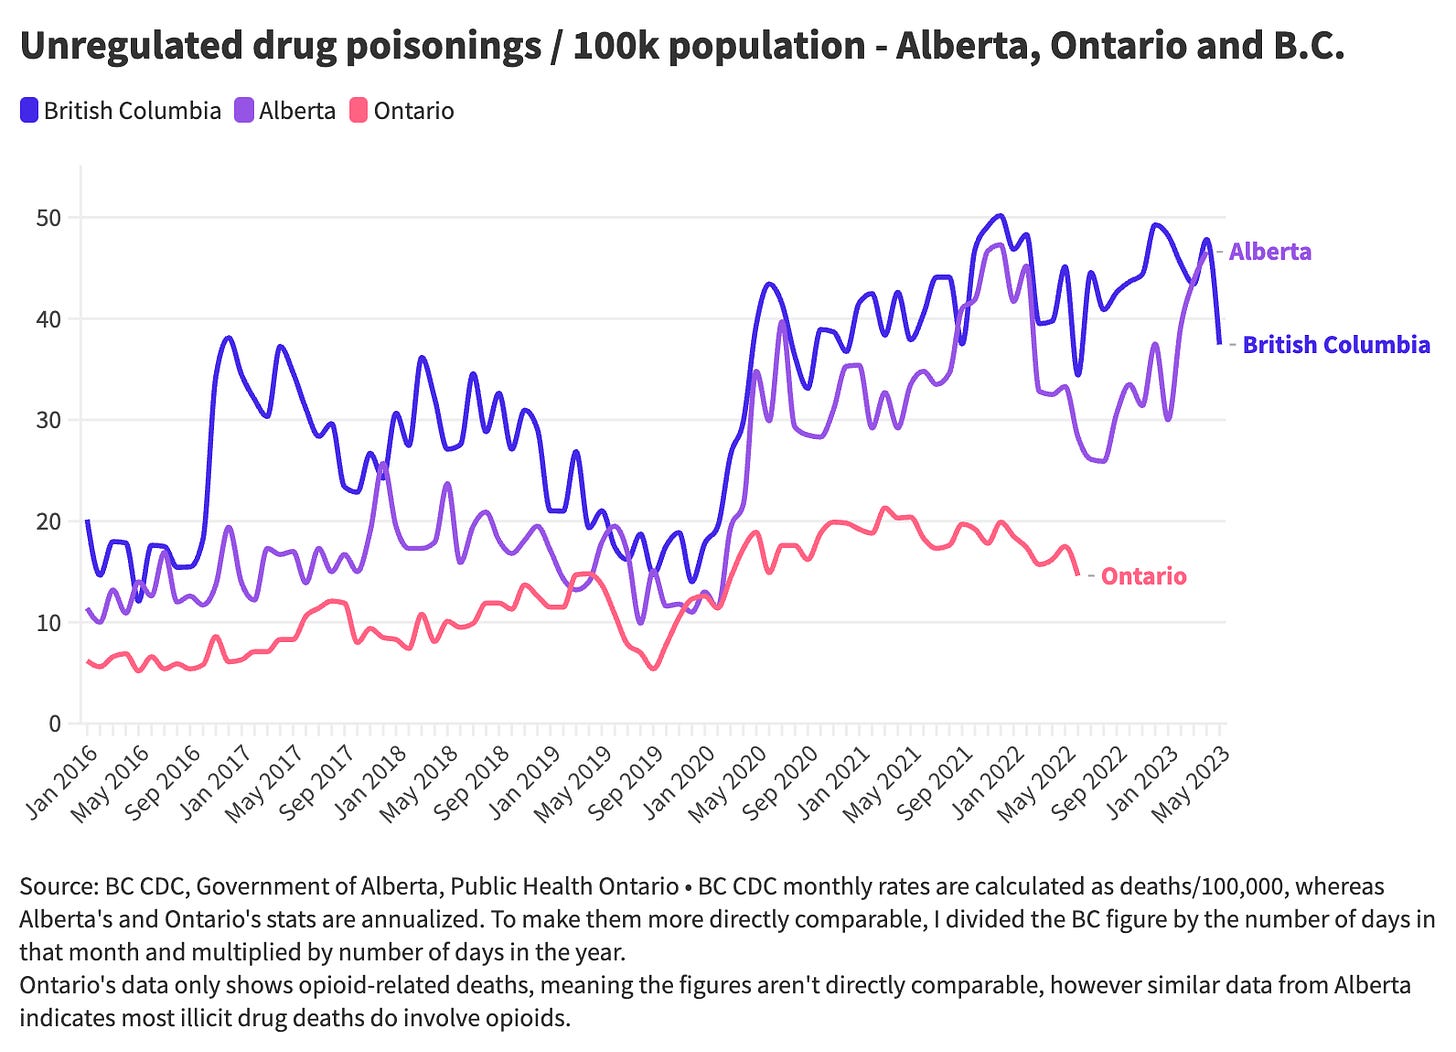 A graph of unregulated drug poisonings in Alberta, BC and Ontario. The data shows BC generally above the other two provinces, and while Ontario is clearly the lowest and it doesn't follow quite the same trajectory as the other two, the two major points where BC and Alberta's deaths dipped are also mirrored in Ontario. The data comes from the BC CDC, the Government of Alberta and Public Health Ontario. A footnote says BC CDC monthly death rates are calculated slightly differently, so I had to do some math to compare them more directly with the other two provinces (it was monthly numbers per capita, and I had to annualize those numbers). Another note says that Ontario's data is only for opioid-related deaths, while the other two provinces are for all illicit drugs.